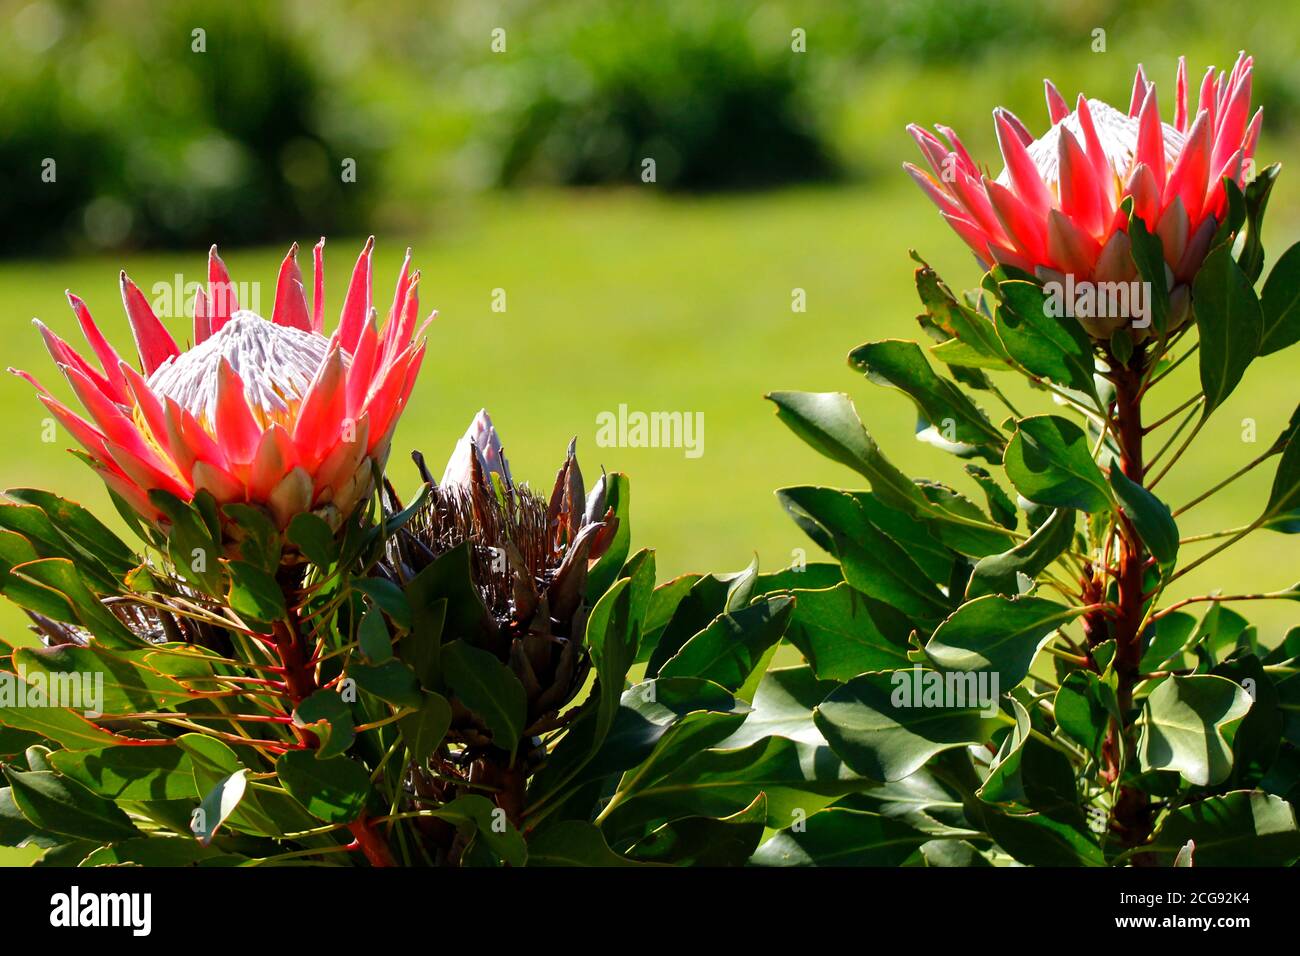 A king protea flowers photographed in Kirstenbosch National Botanical Garden in Cape Town. Stock Photo